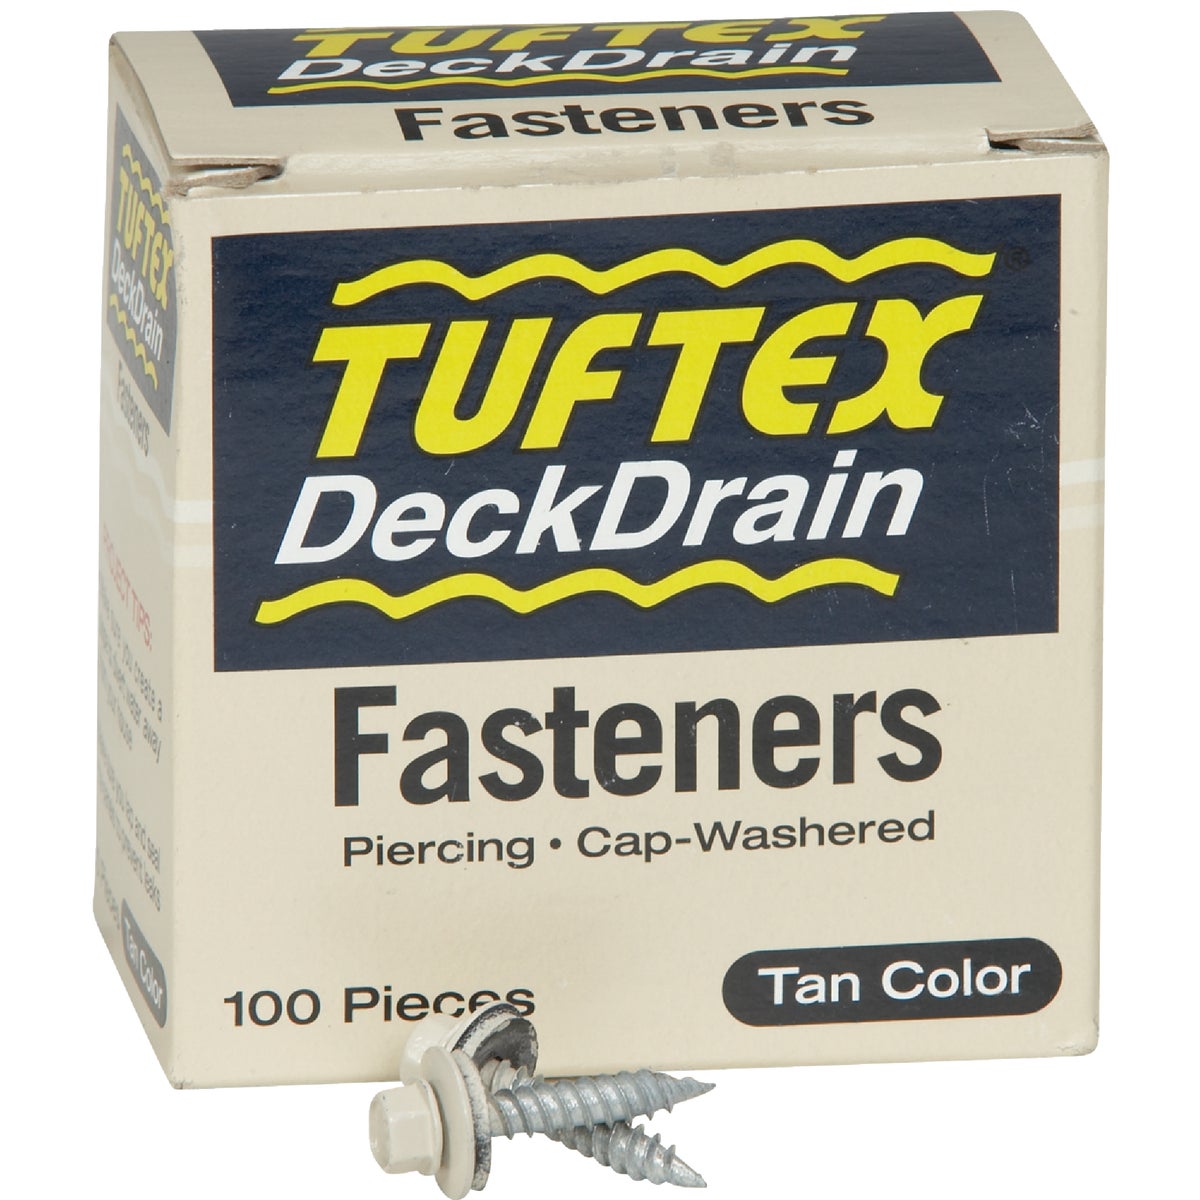 Item 100955, For use with the Tuftex DeckDrain system.